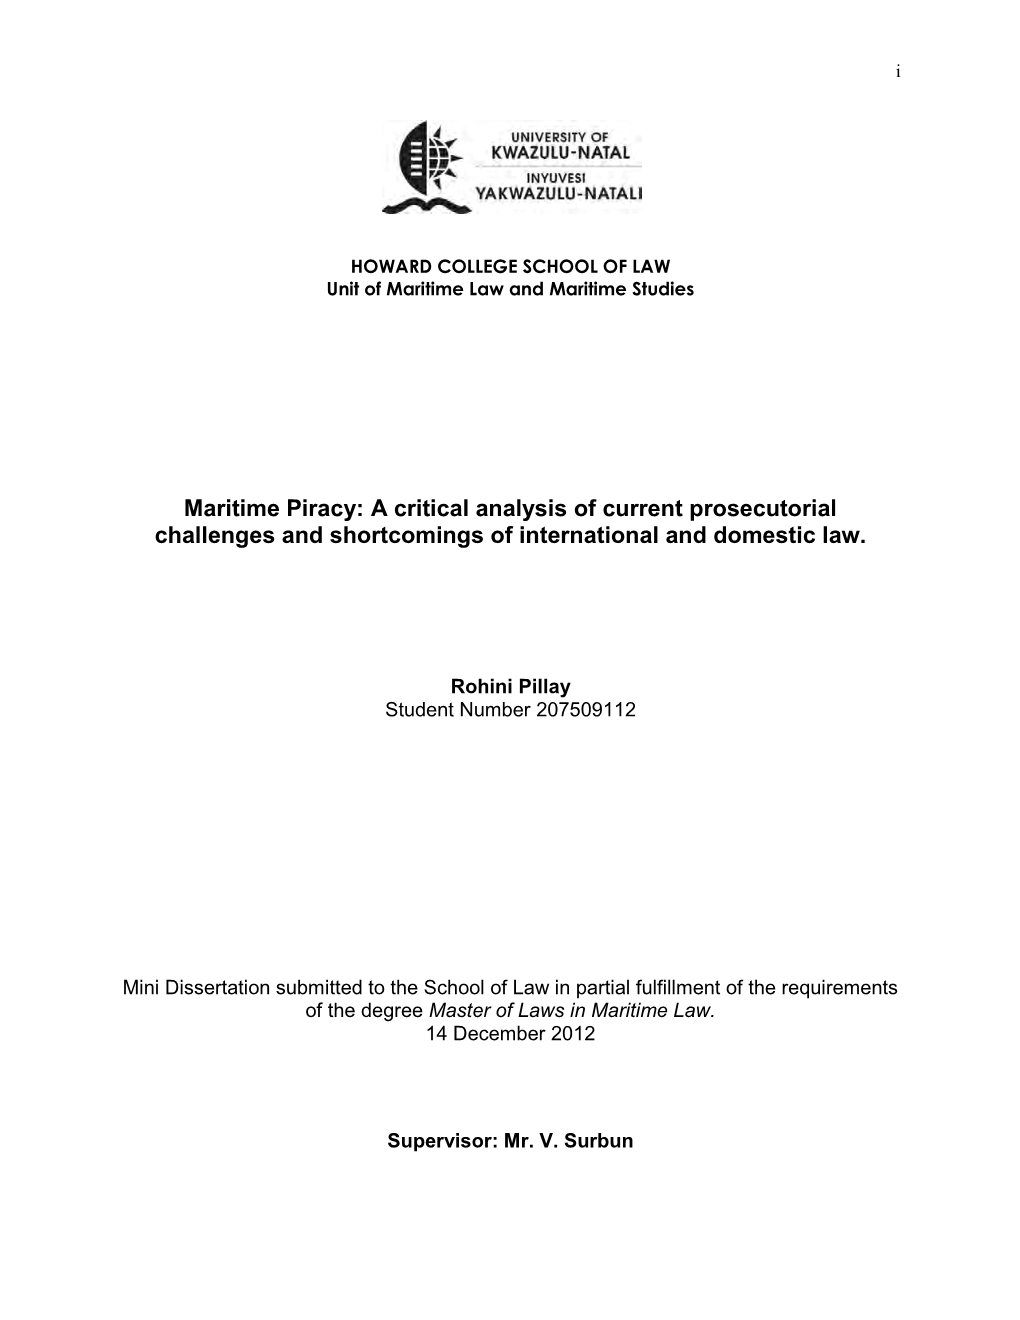 Maritime Piracy: a Critical Analysis of Current Prosecutorial Challenges and Shortcomings of International and Domestic Law